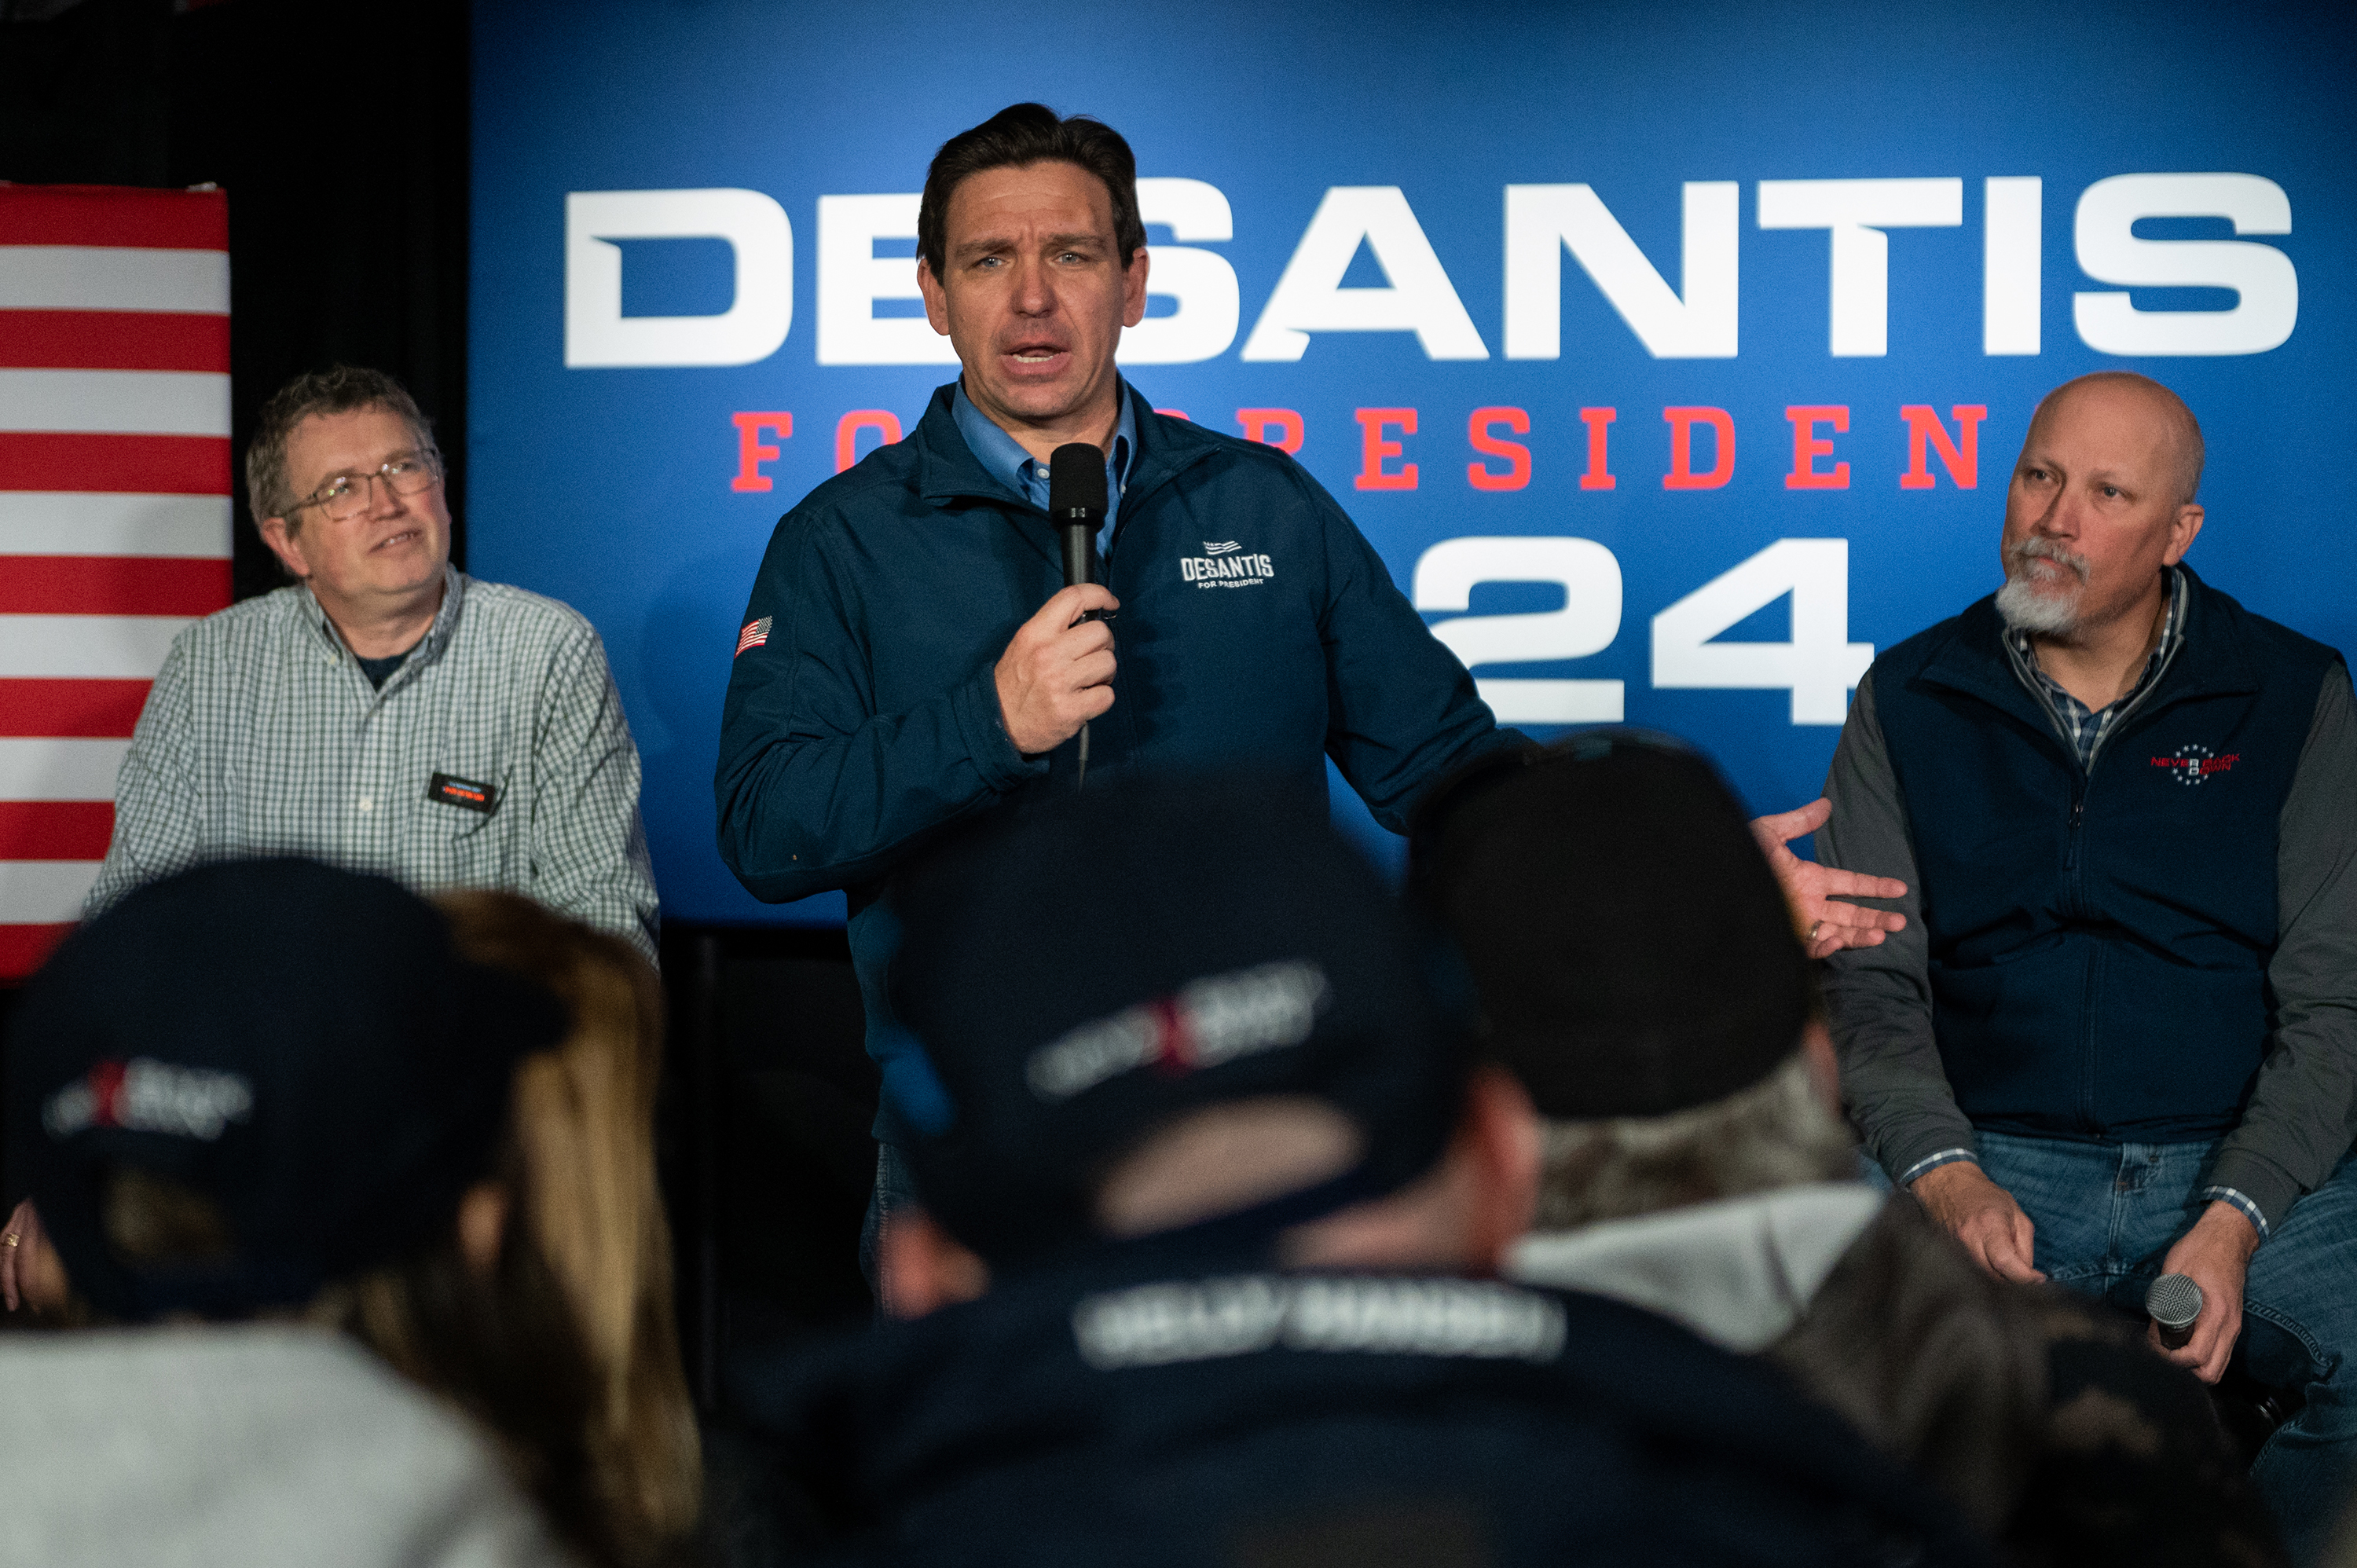 Florida Gov. Ron DeSantis holds a town hall at Wally’s in Hampton, New Hampshire, on January 17.